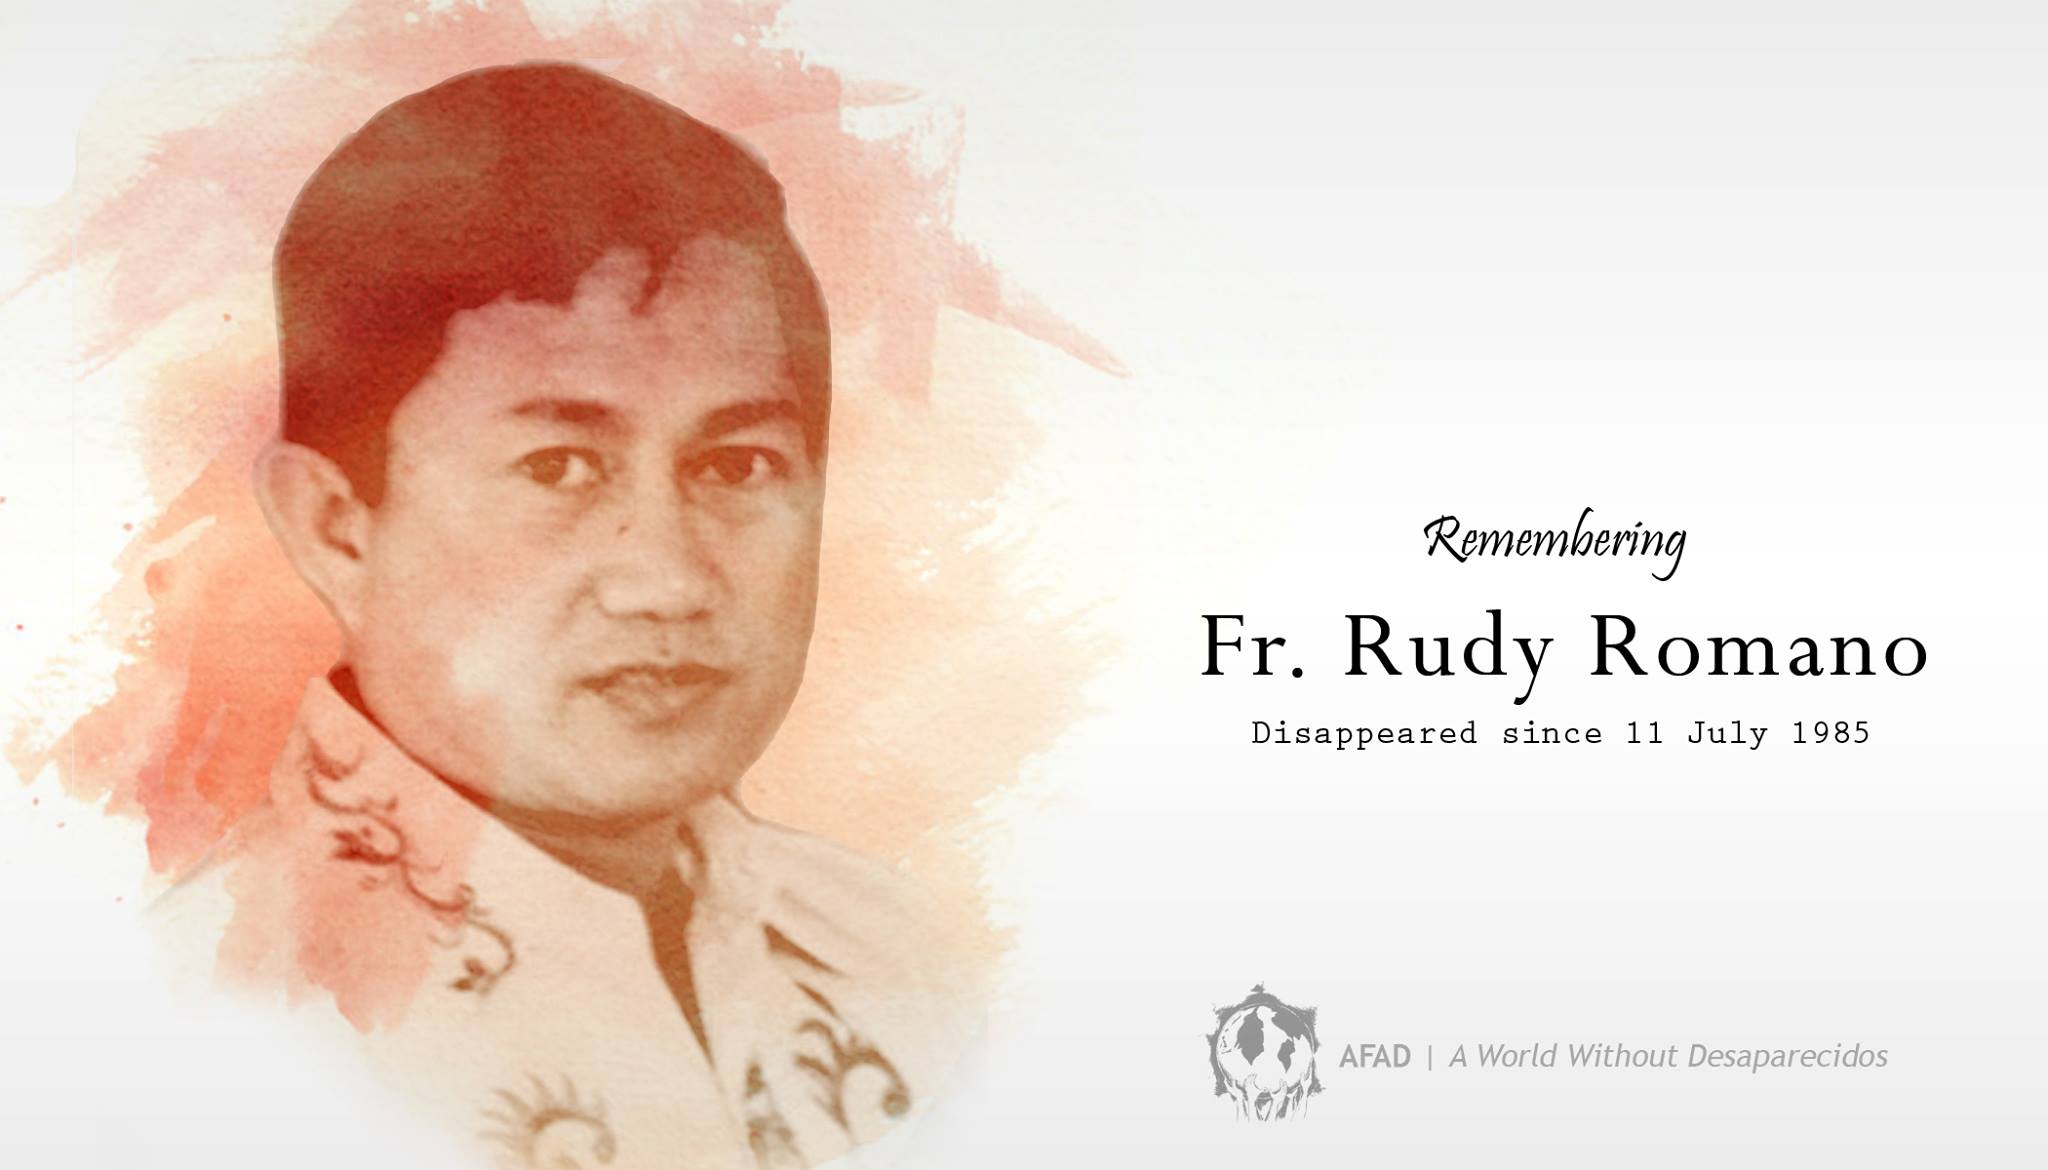 fr.rudy.romano.disappeared.1985.07.11